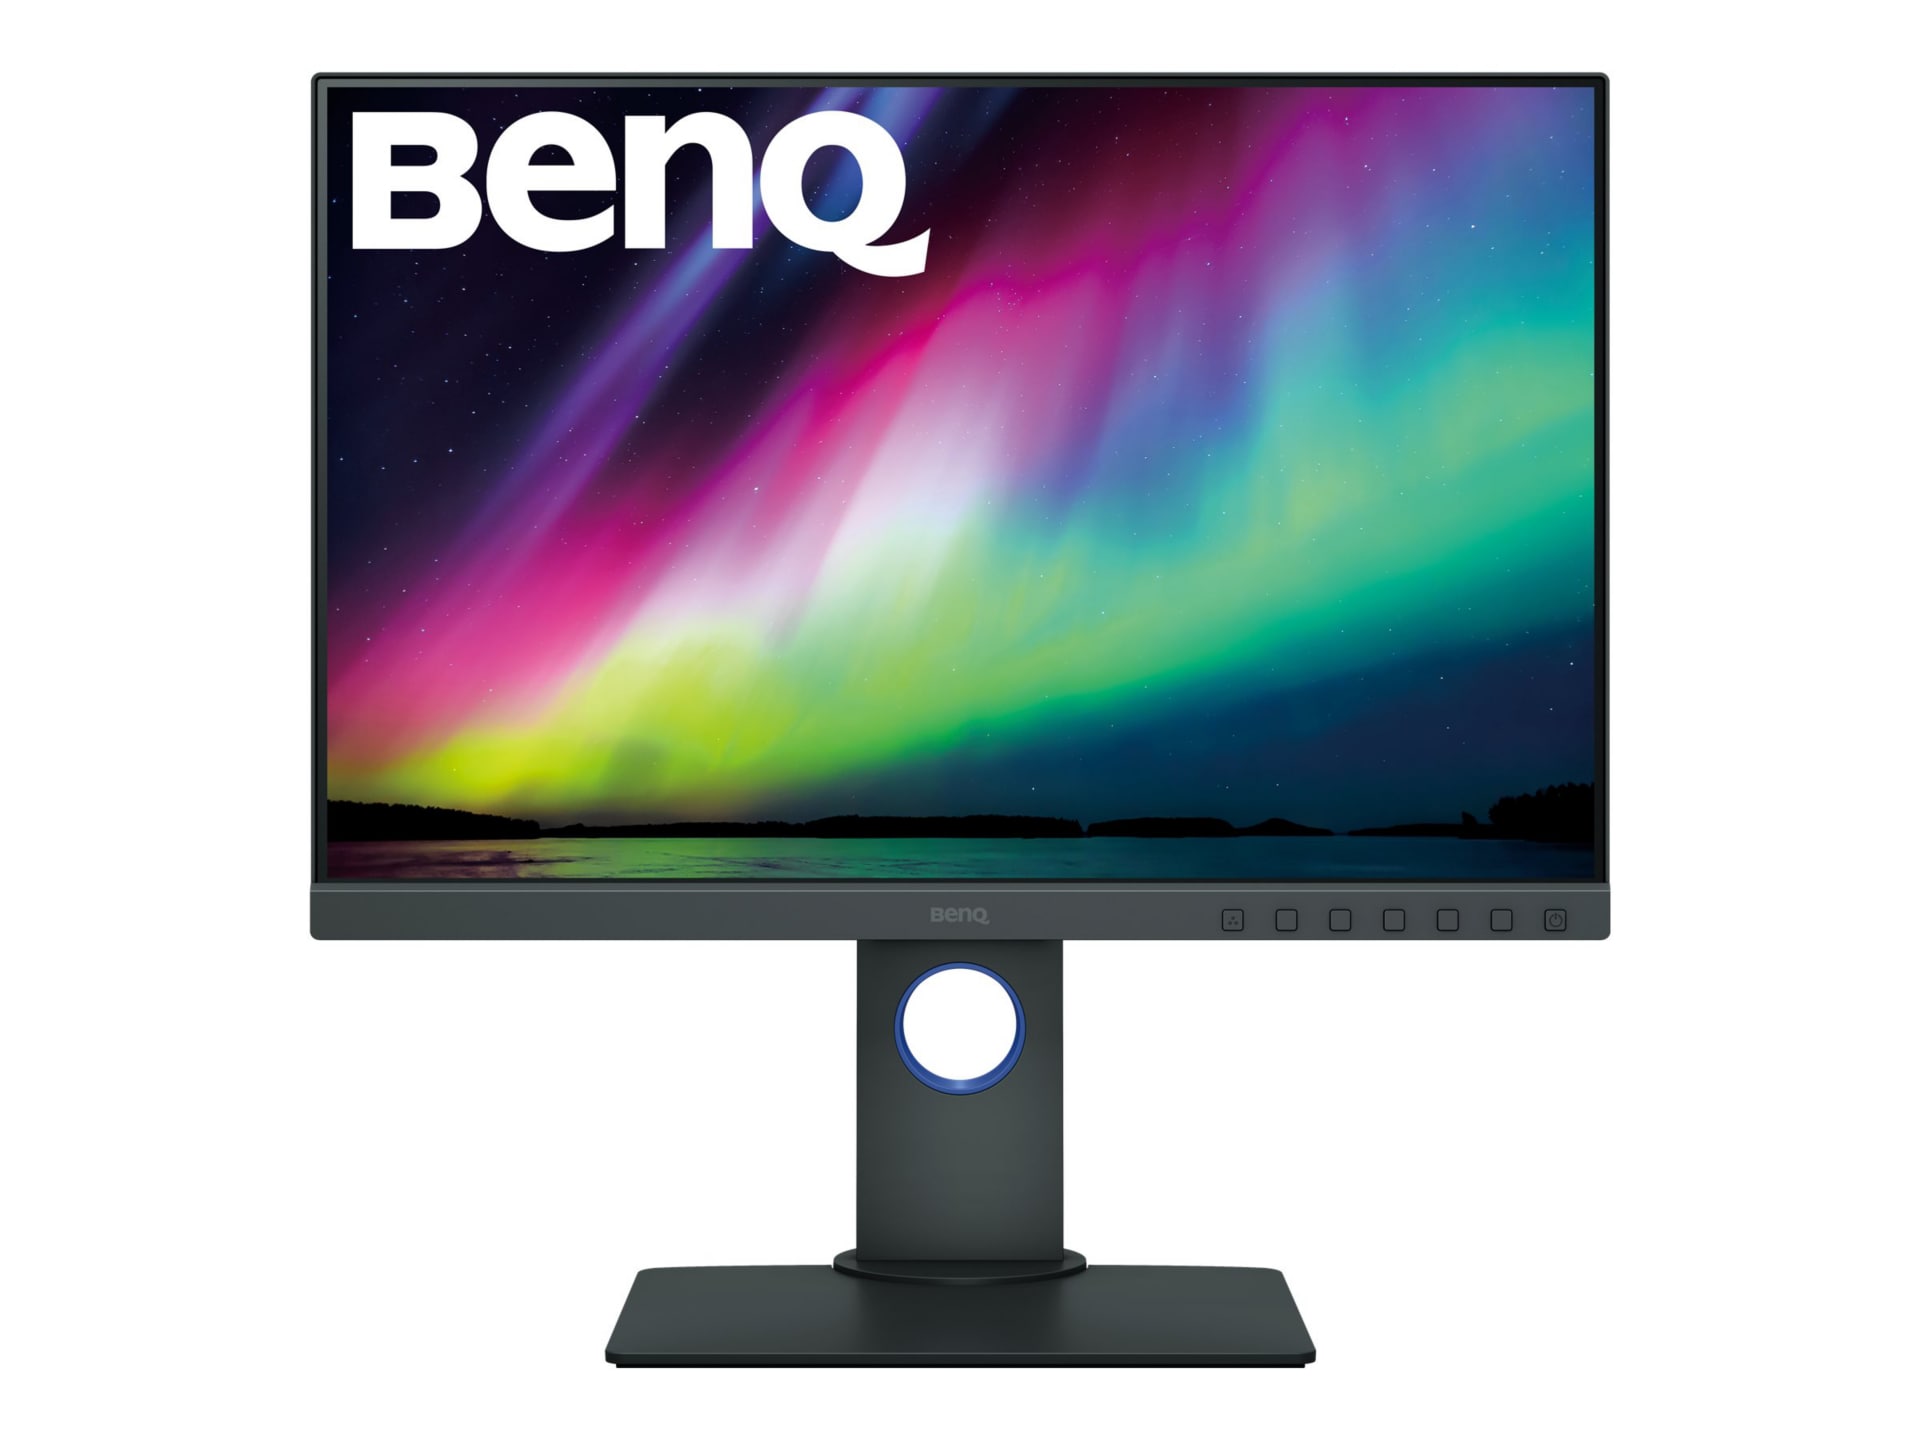 BenQ PhotoVue SW240 - AQCOLOR - 24" Monitor